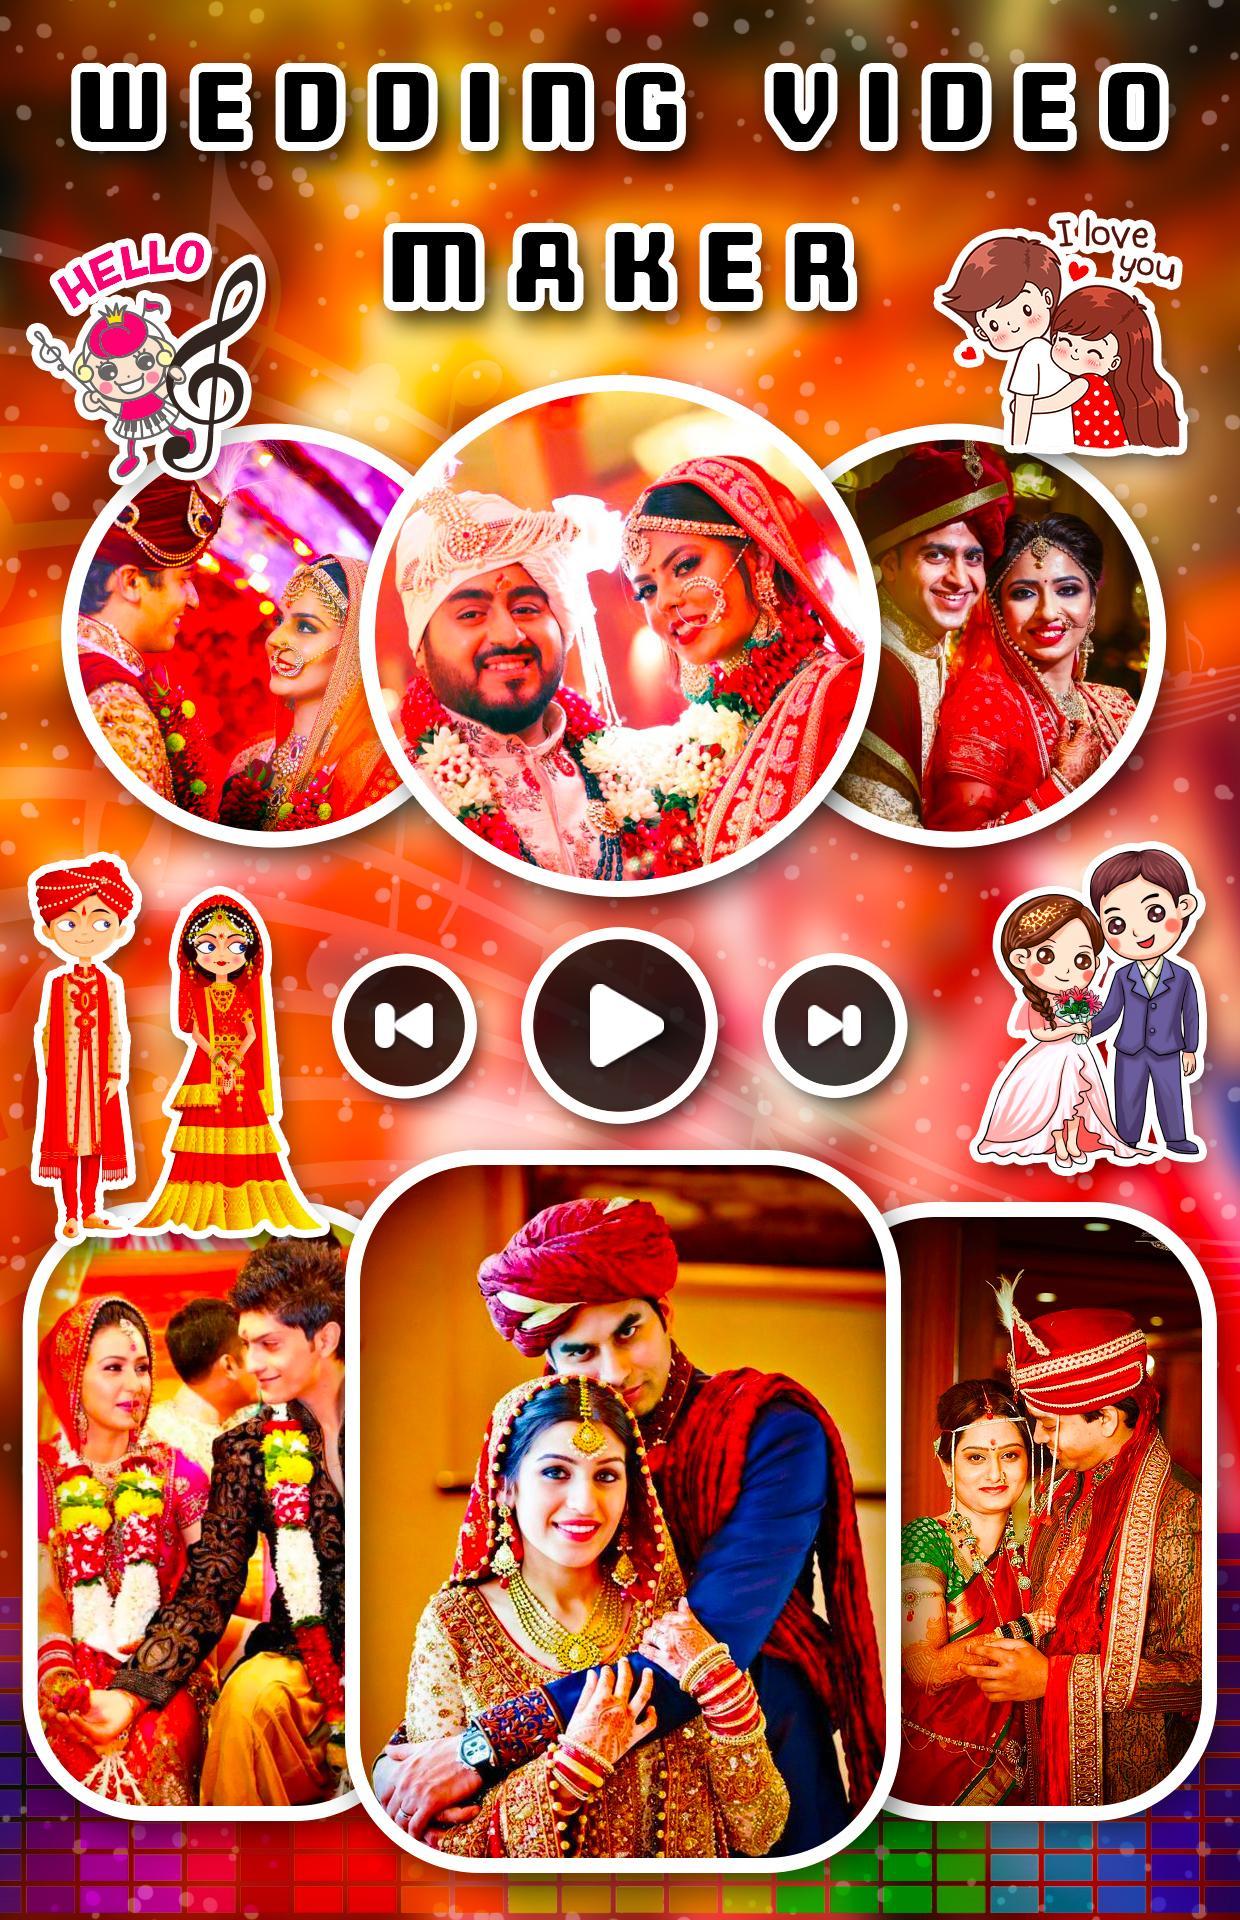 wedding-video-maker-with-wedding-songs-apk-for-android-download